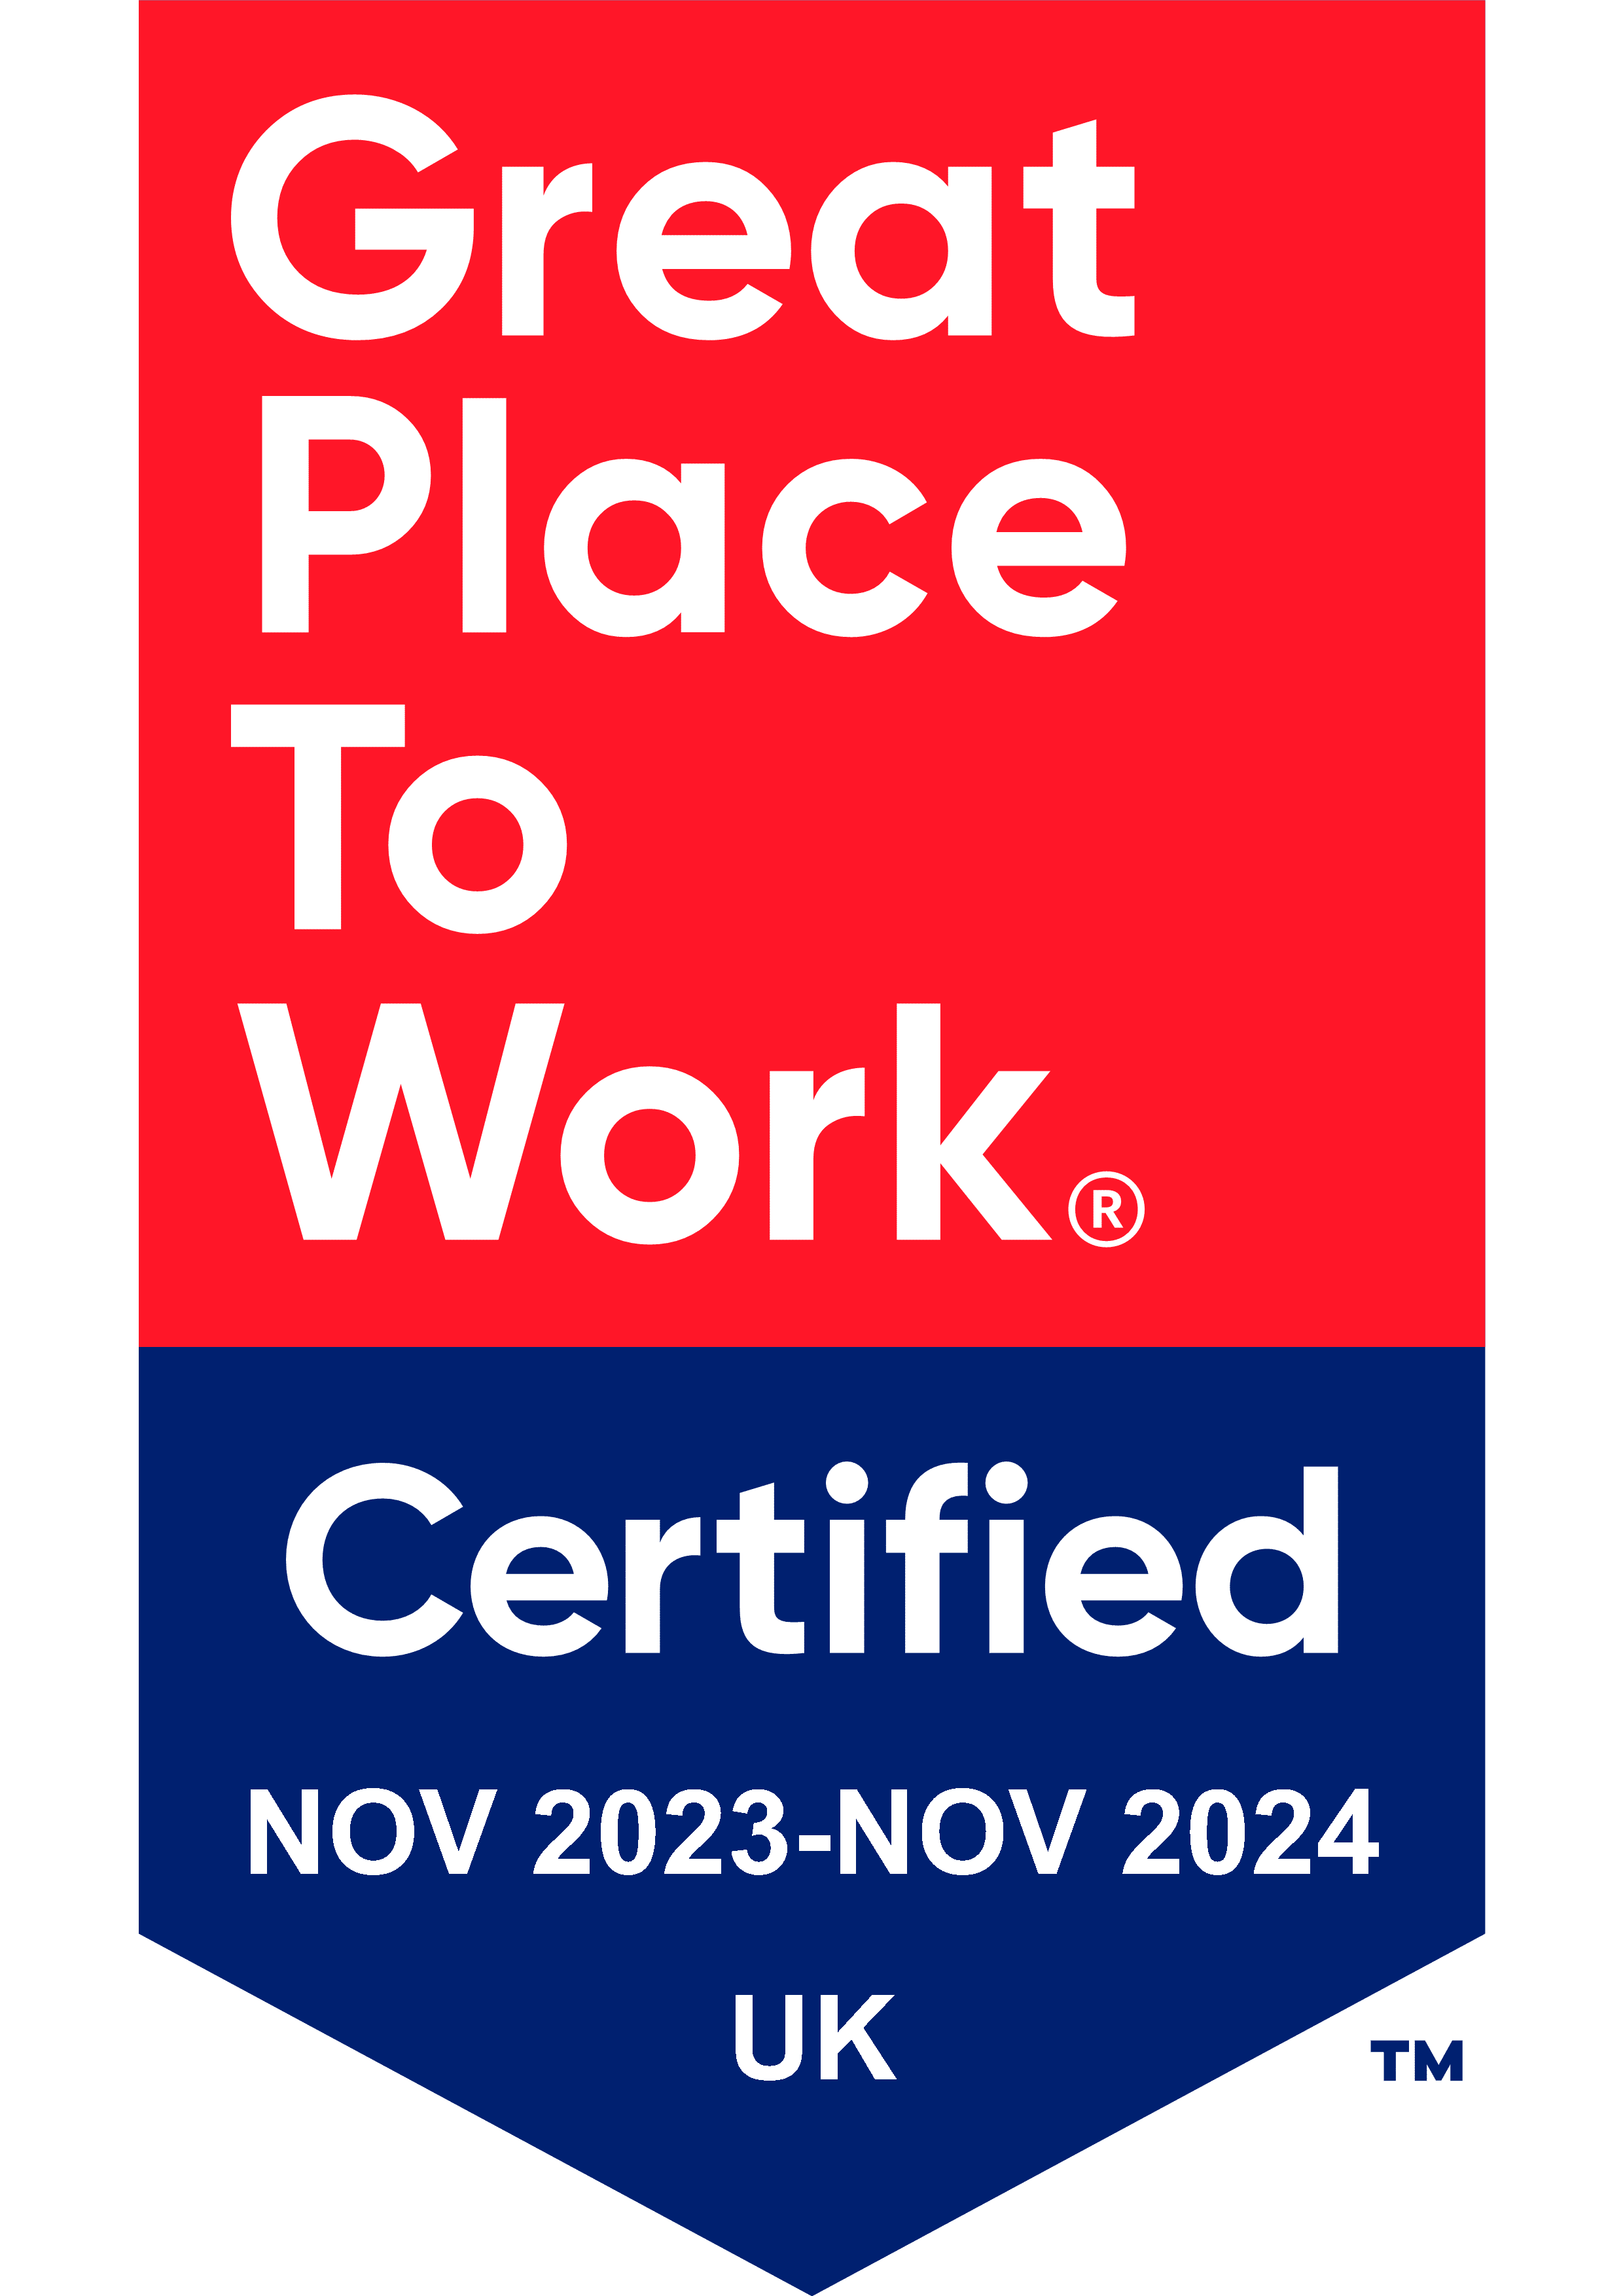 Great place to work certified UK